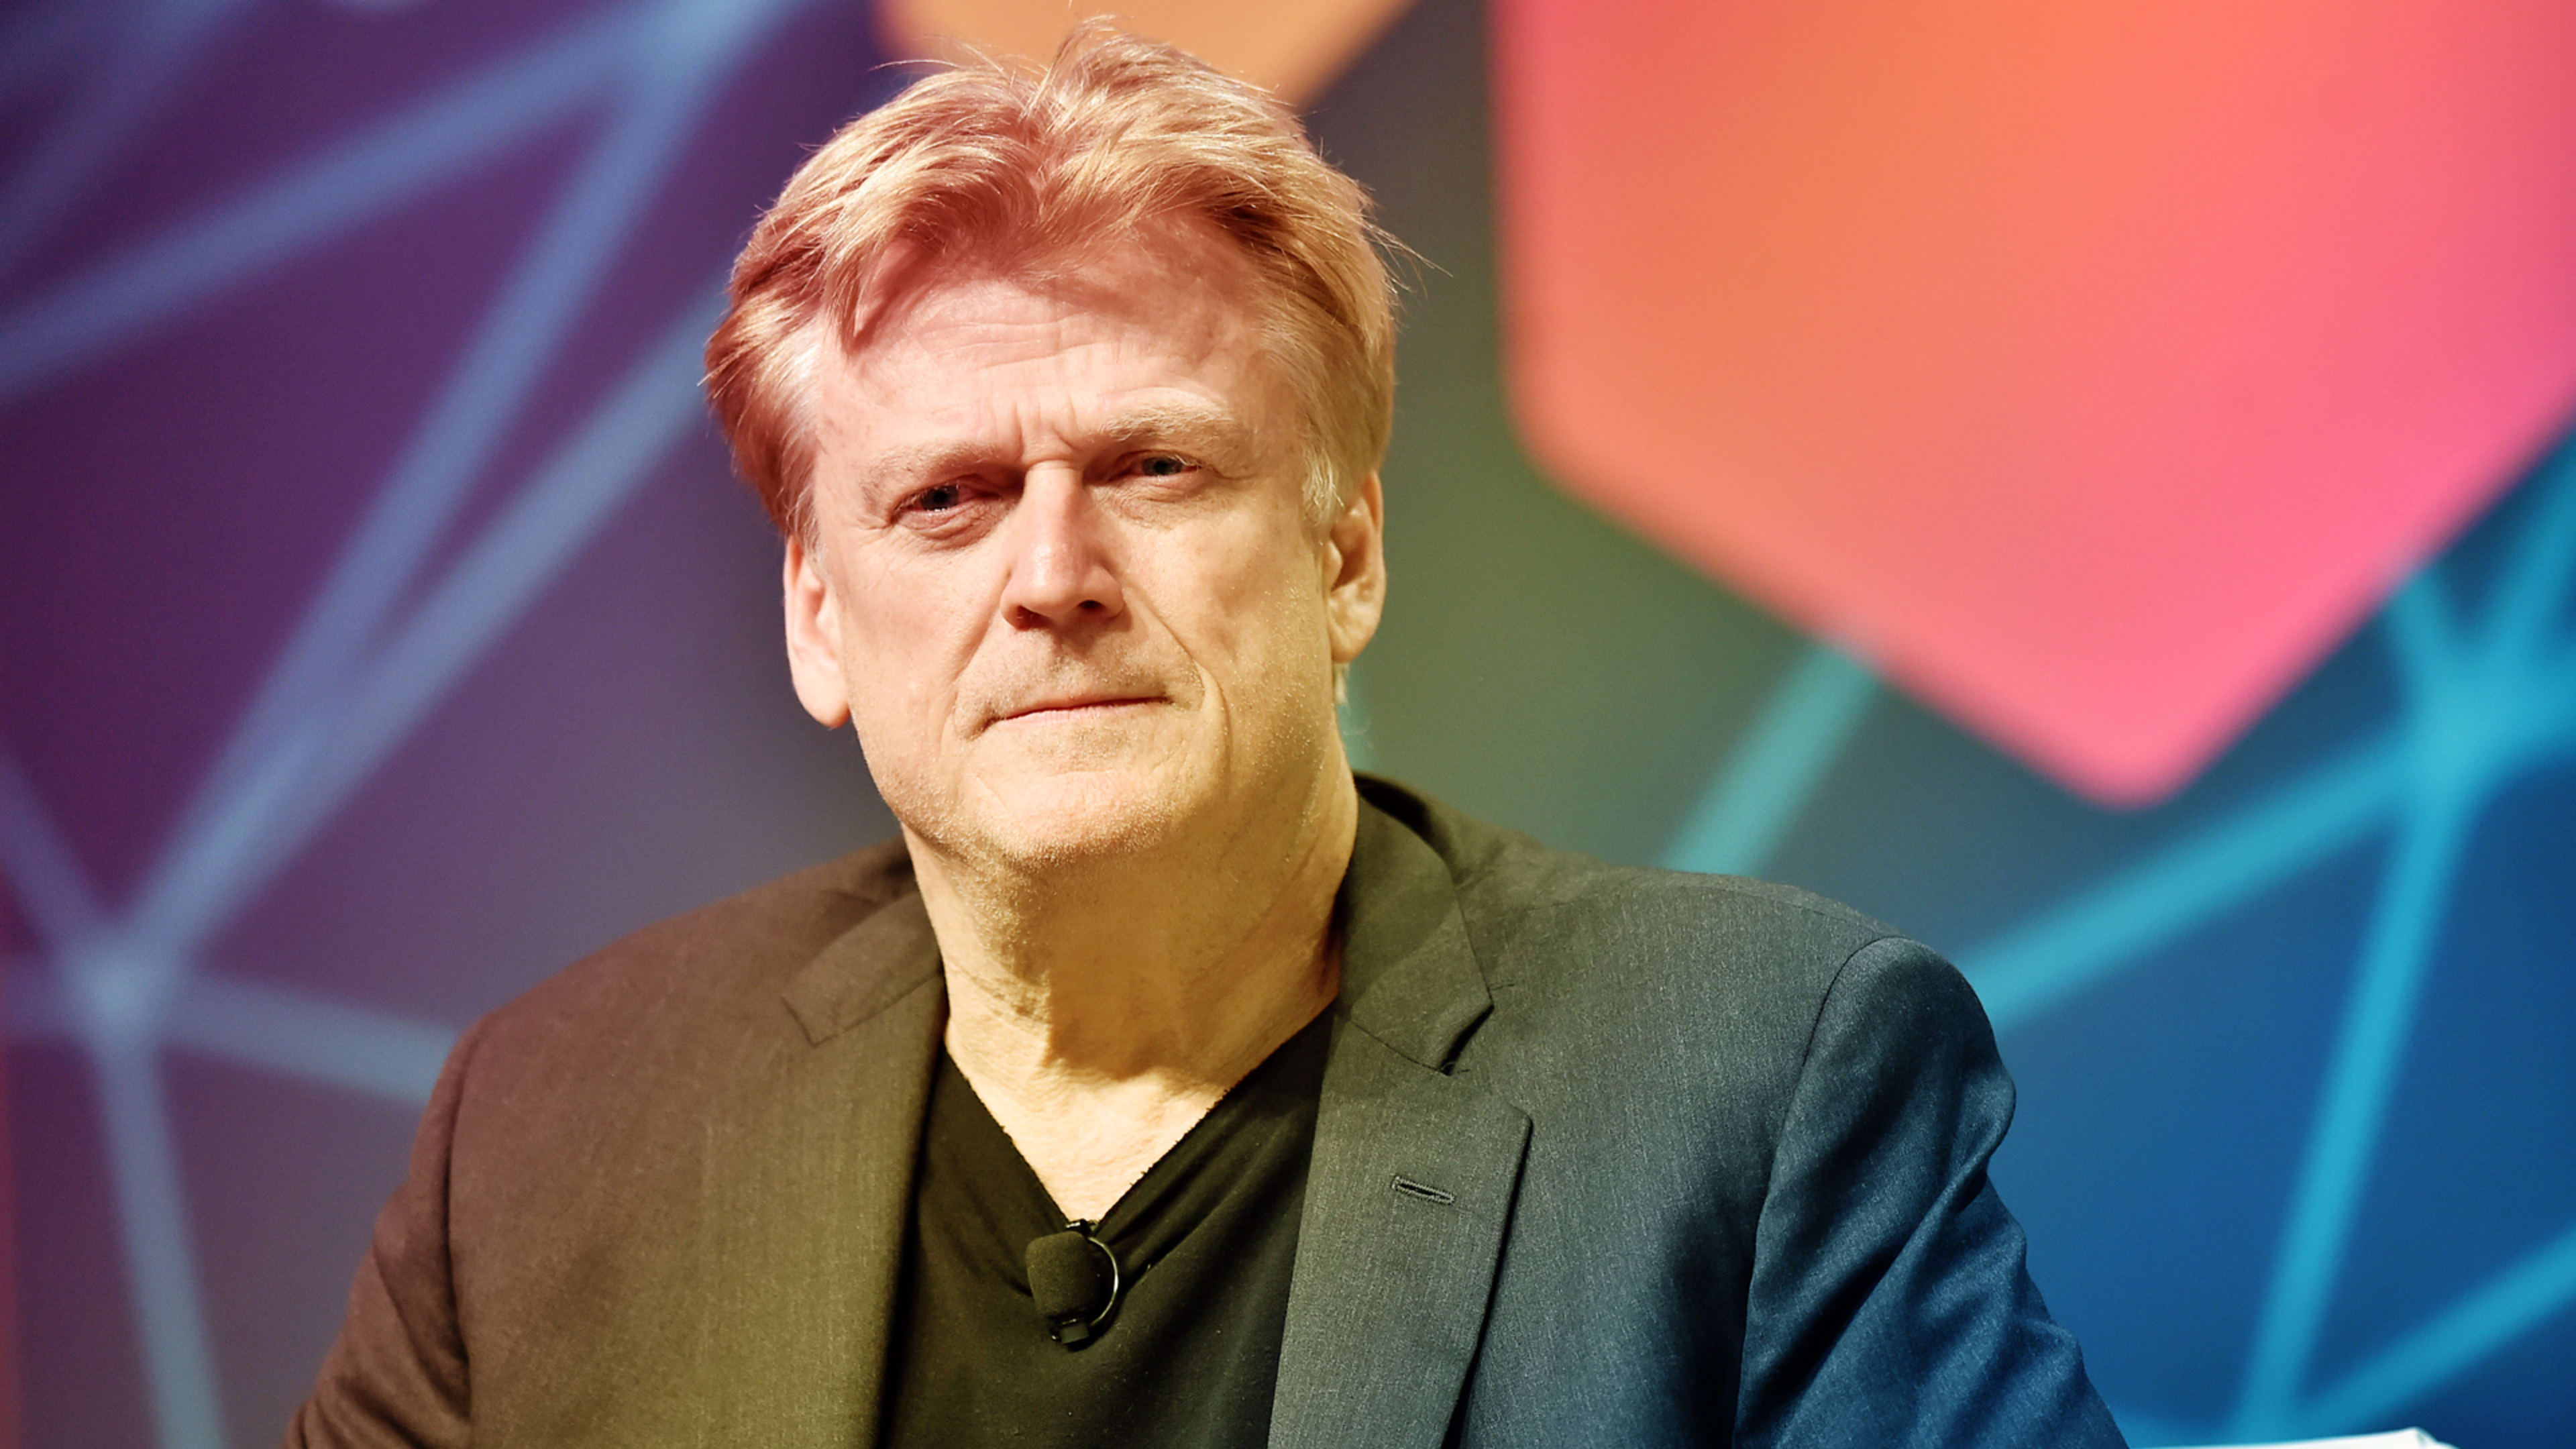 Overstock.com CEO is out after ‘deep state’ comments and claims of affair